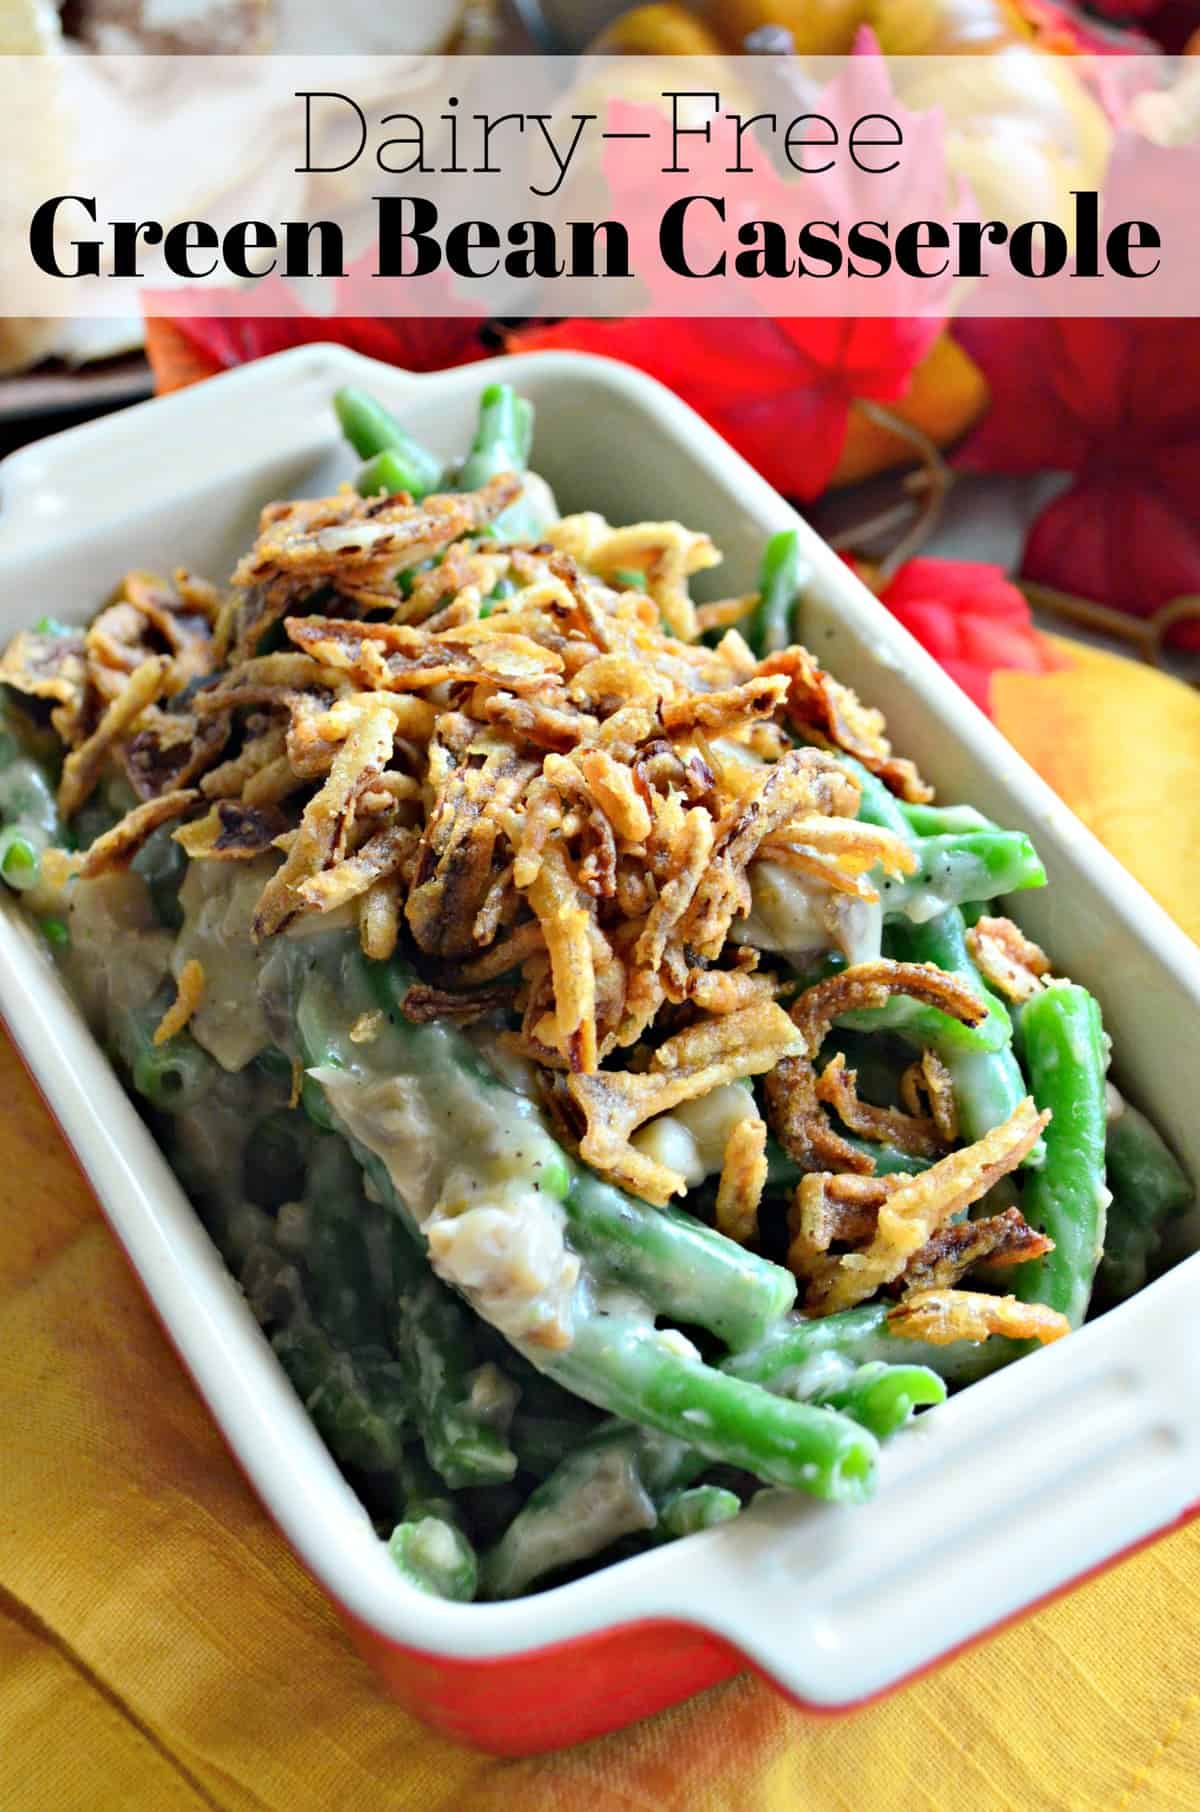 small casserole dish of green beans with white chunky substance topped with crispy onions. title text.